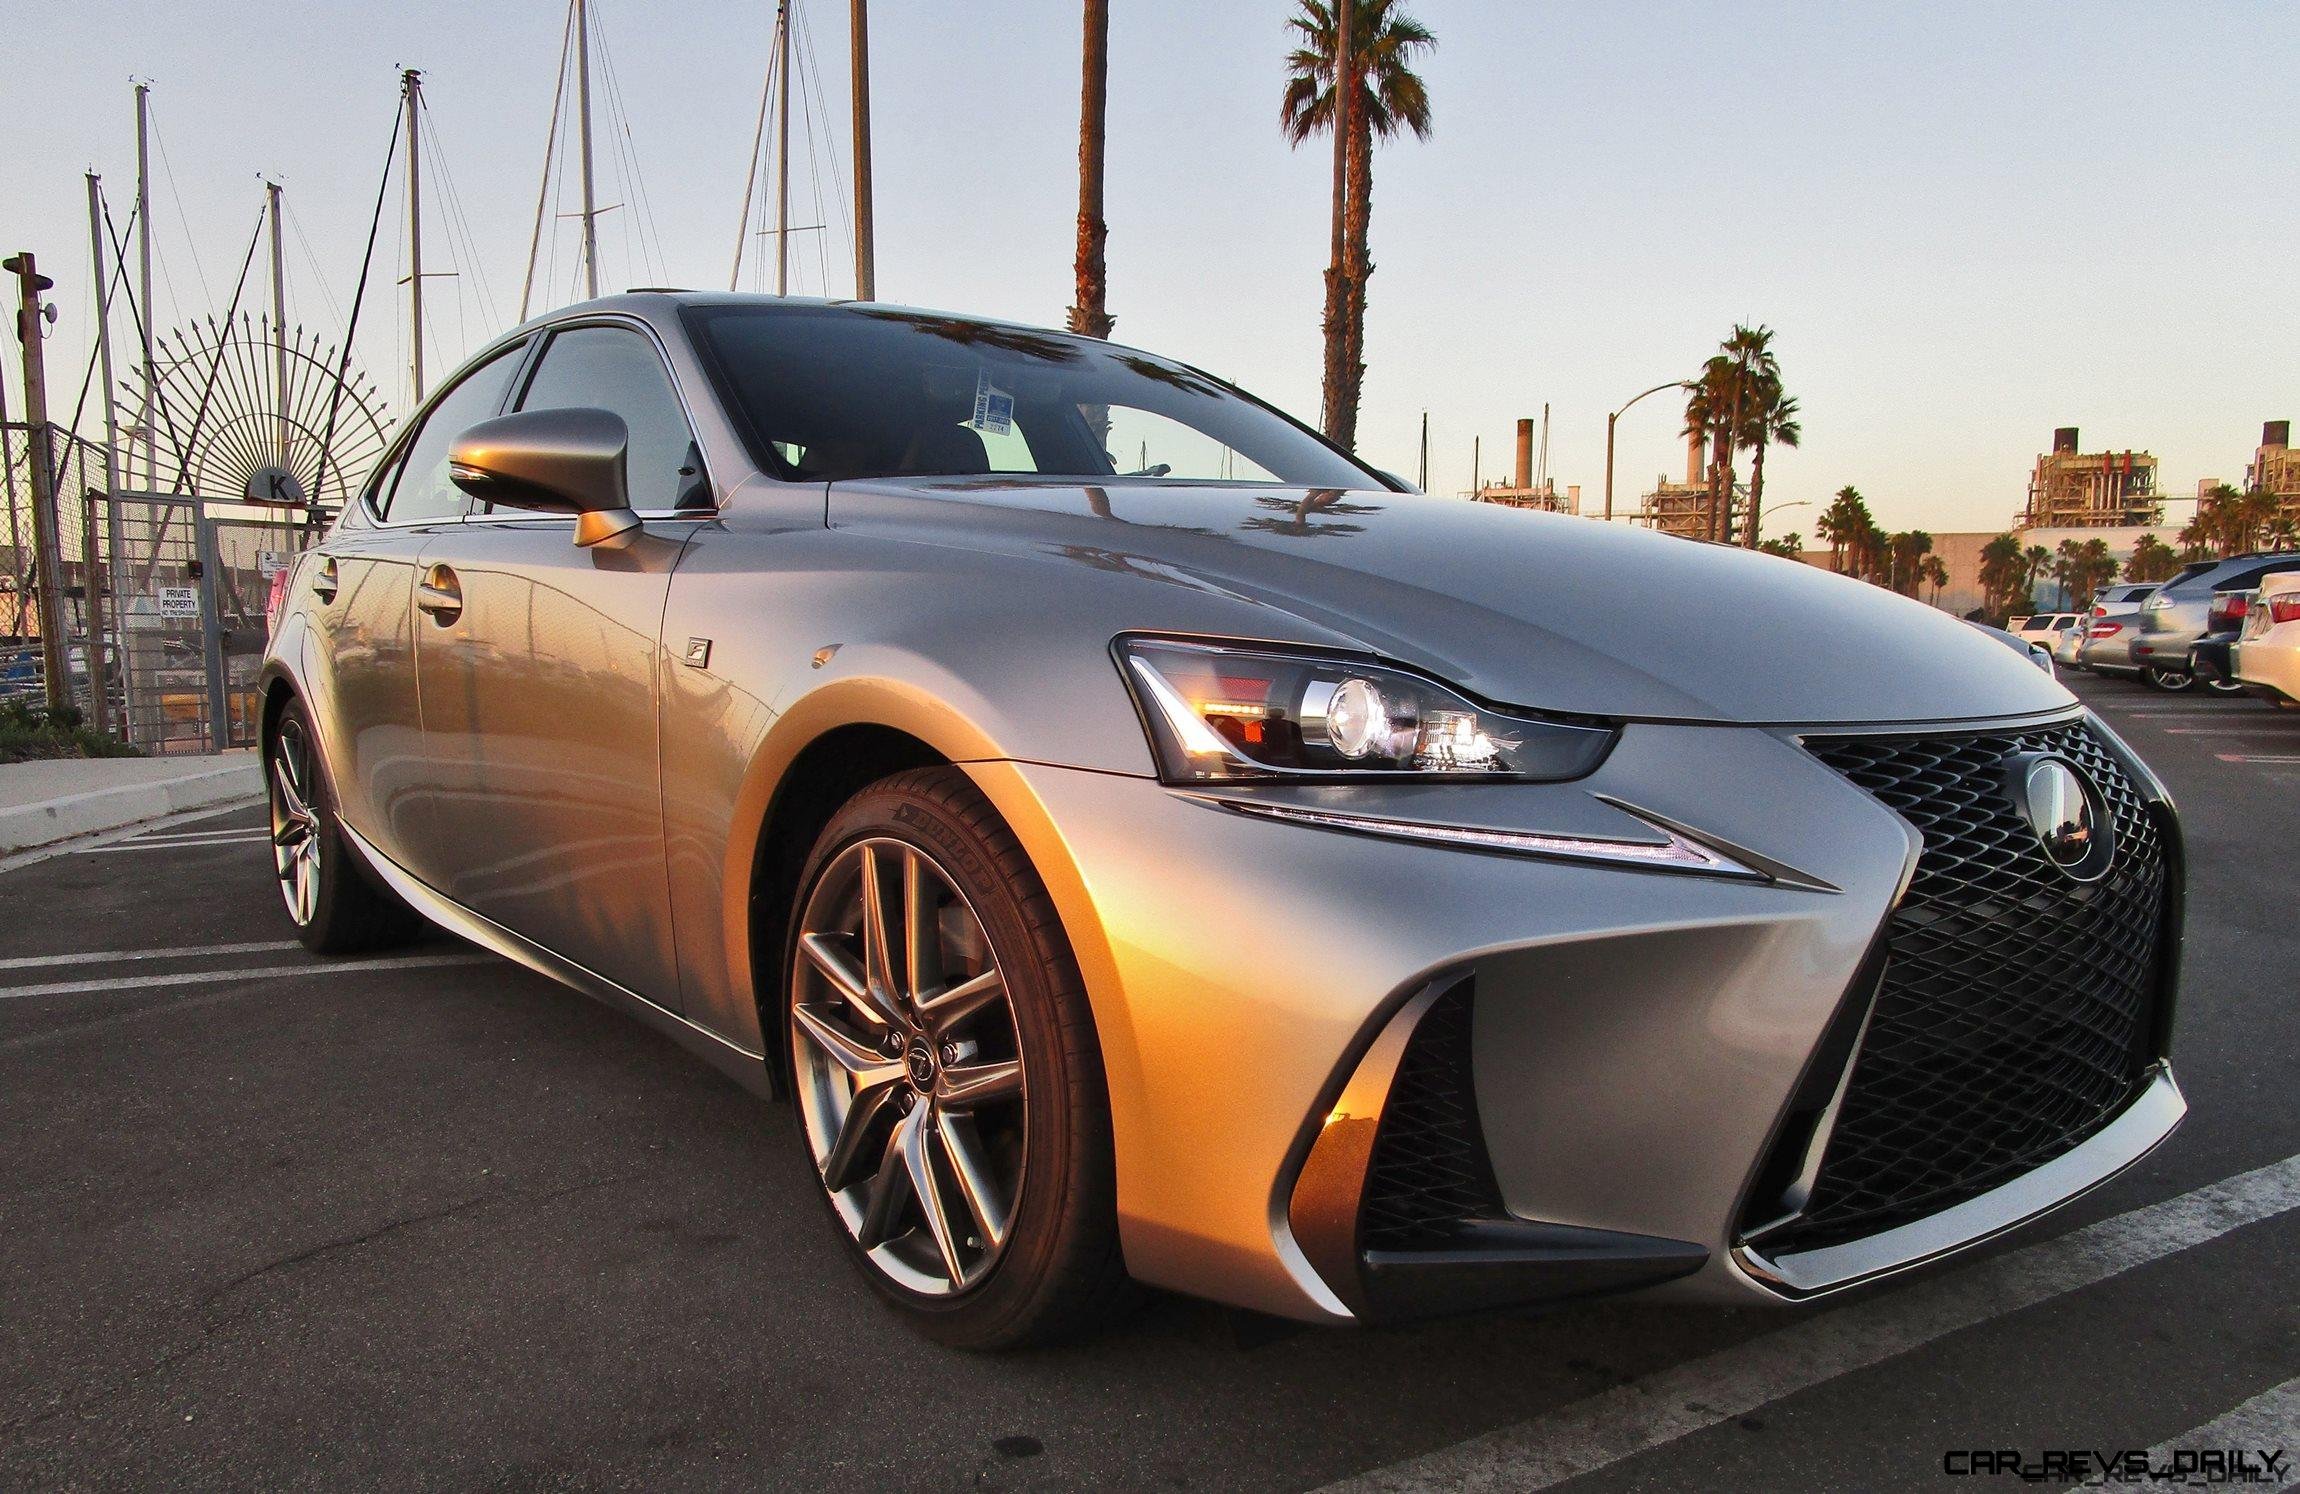 2017 Lexus IS350 F Sport - Road Test Review - By Ben Lewis » CAR SHOPPING